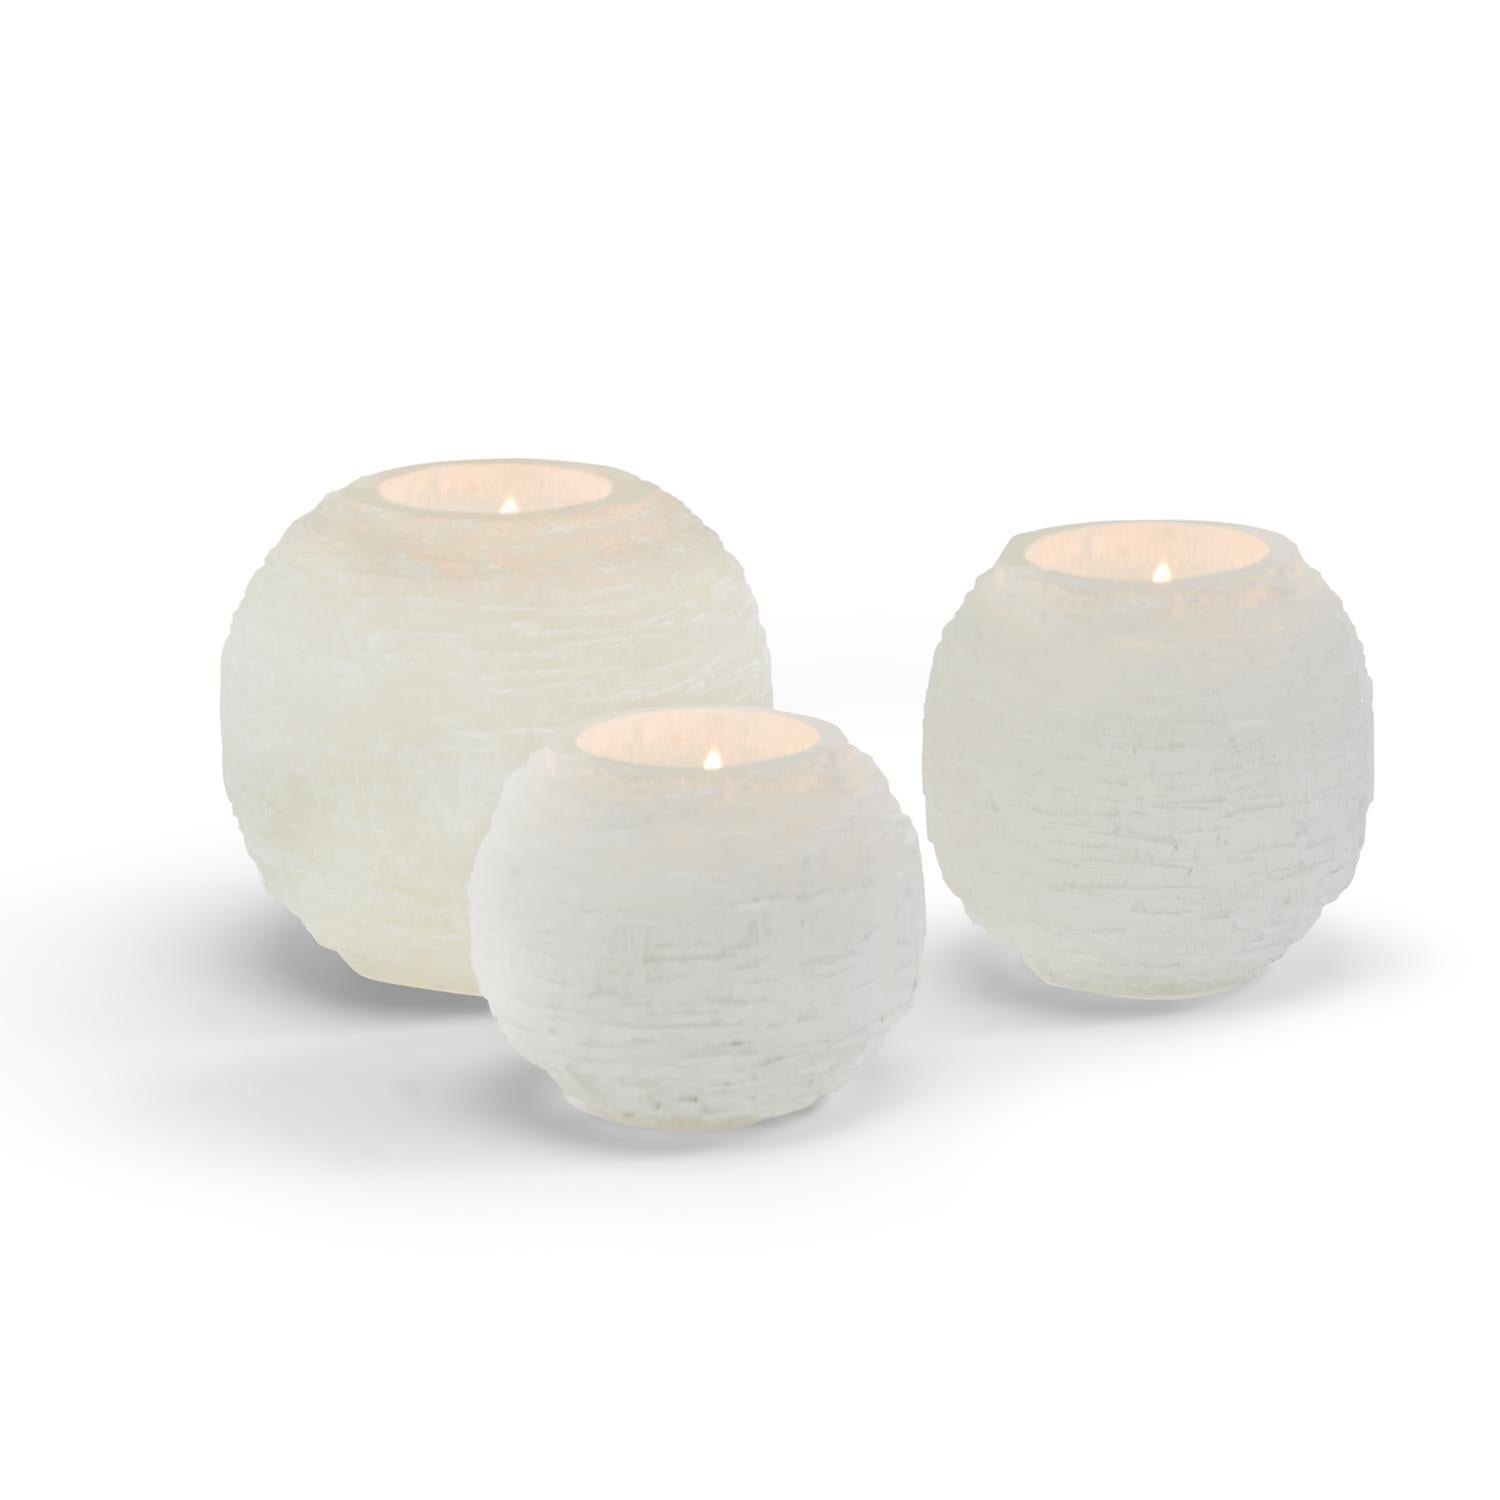 Two's Company Selenite Crystal Sphere Candle Holder - Medium